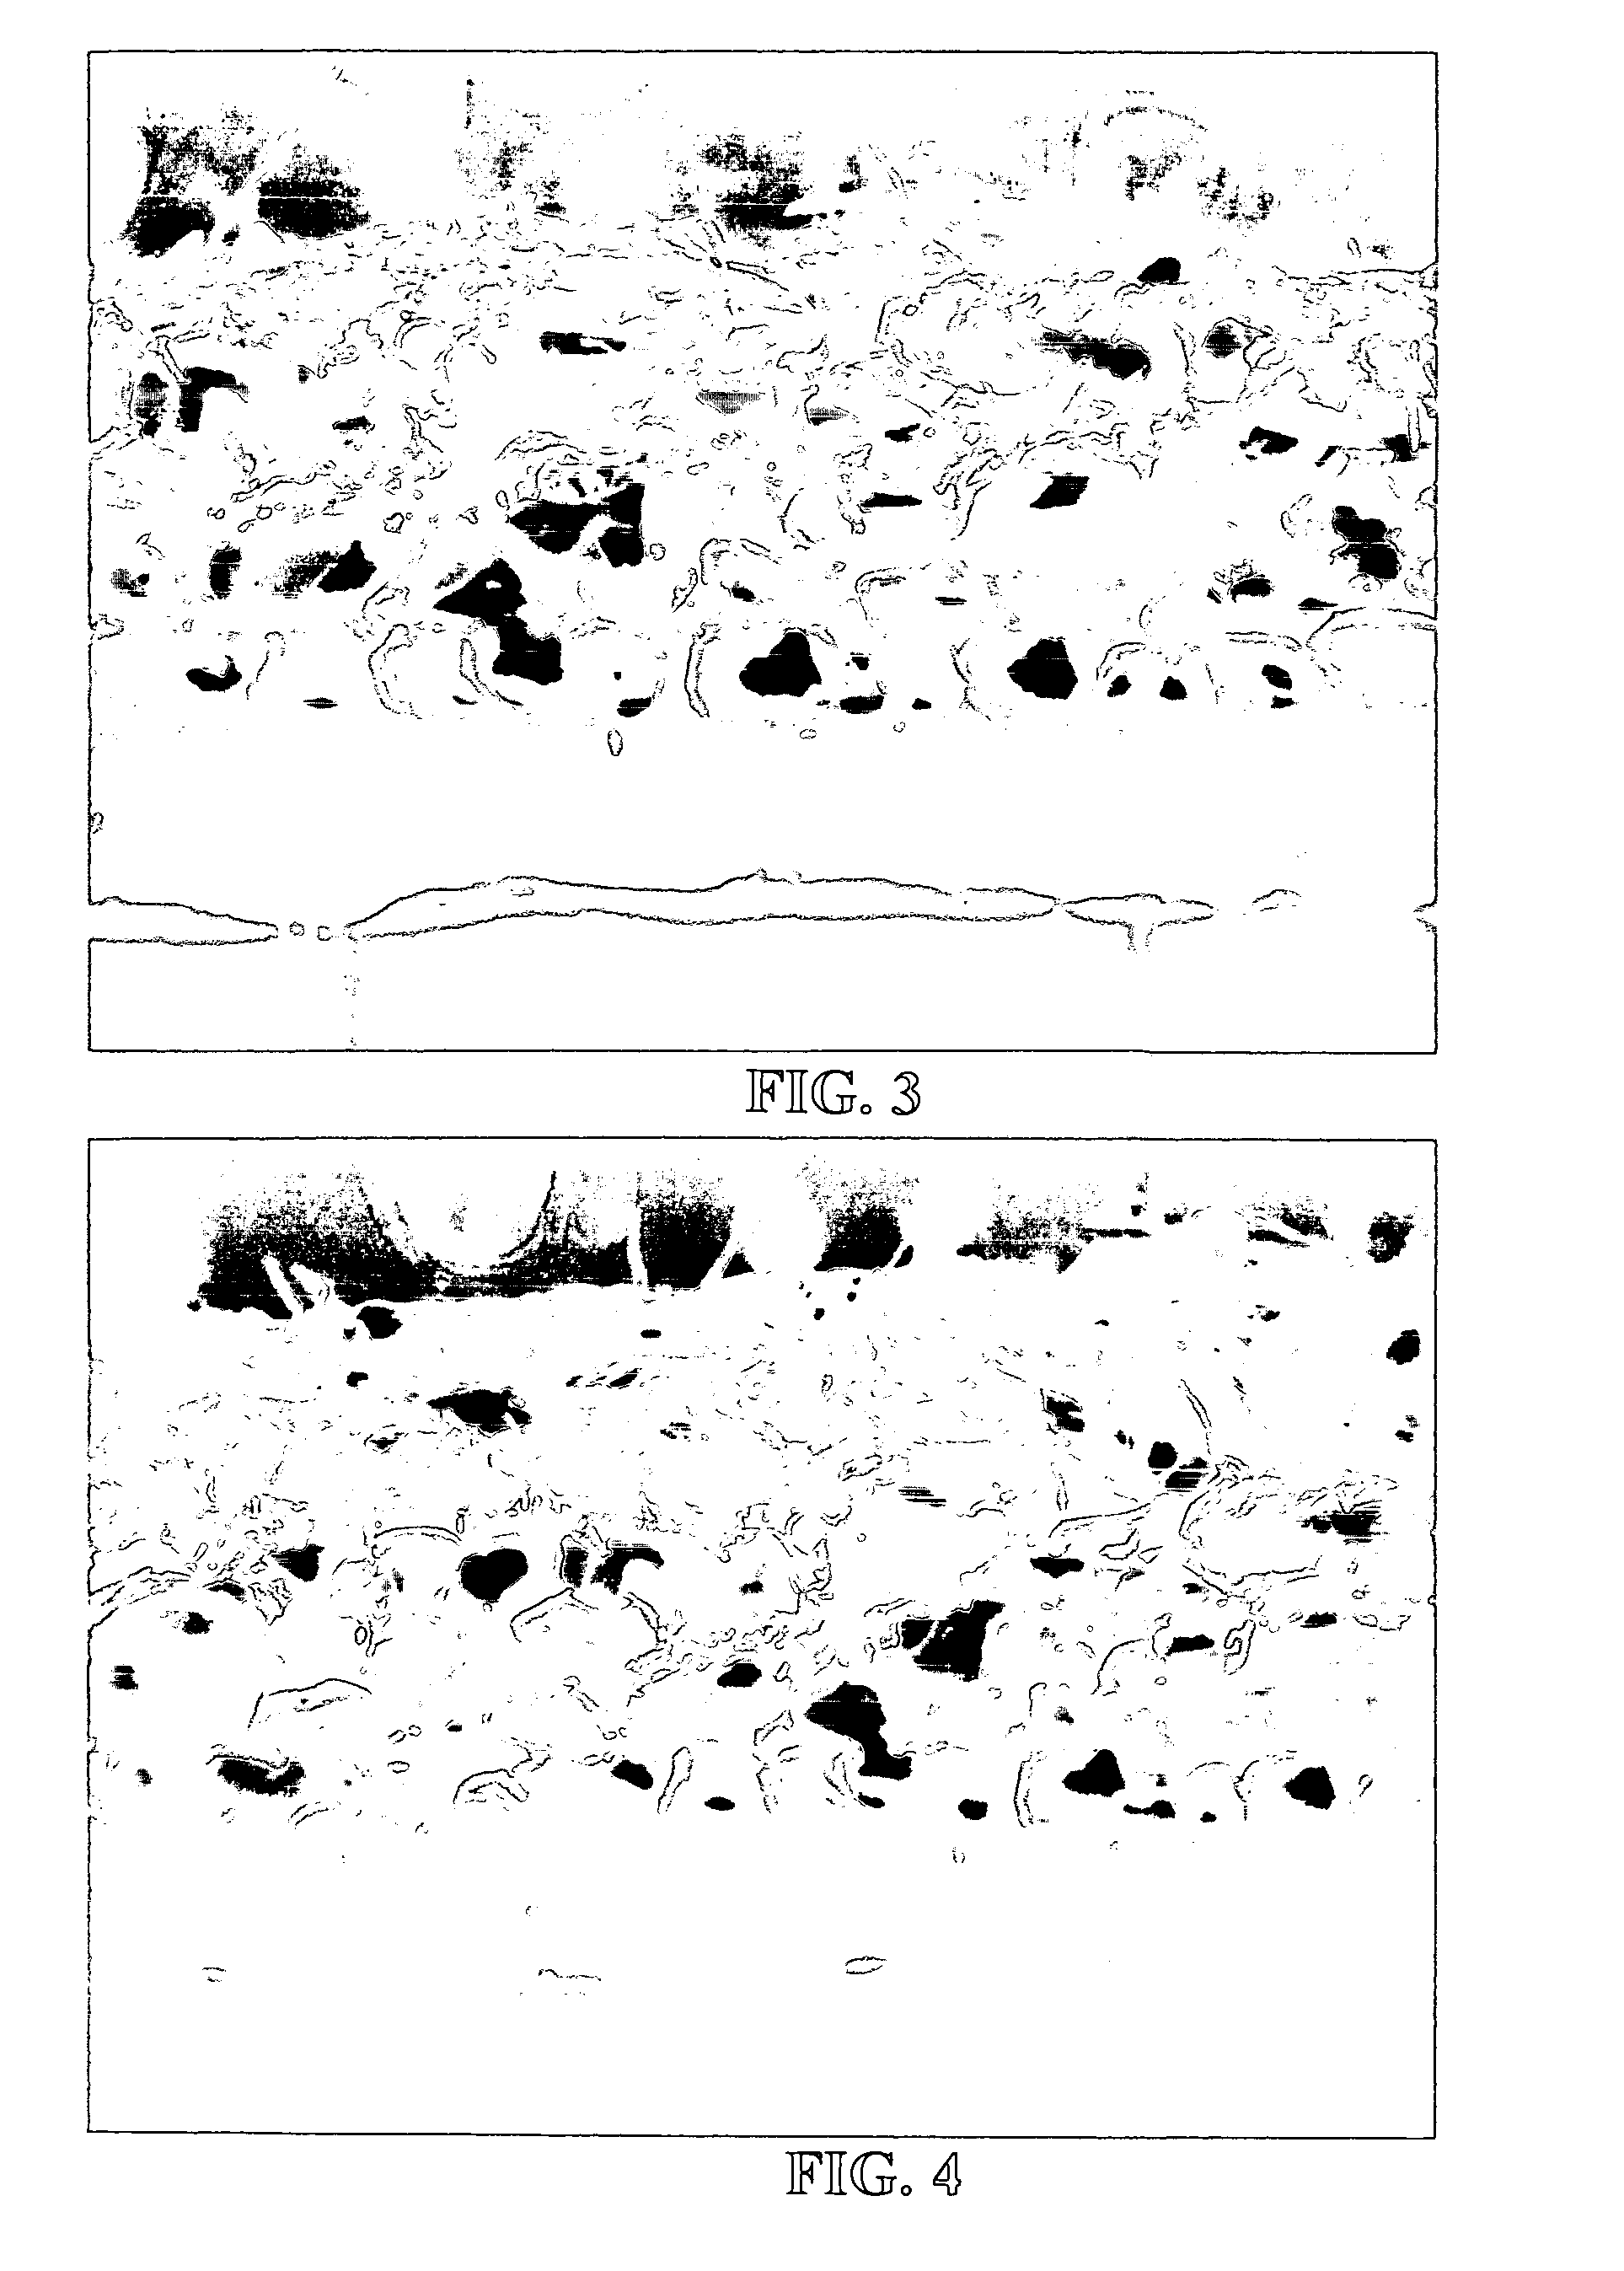 Polymer composite fibrous coating on dipped rubber articles and method